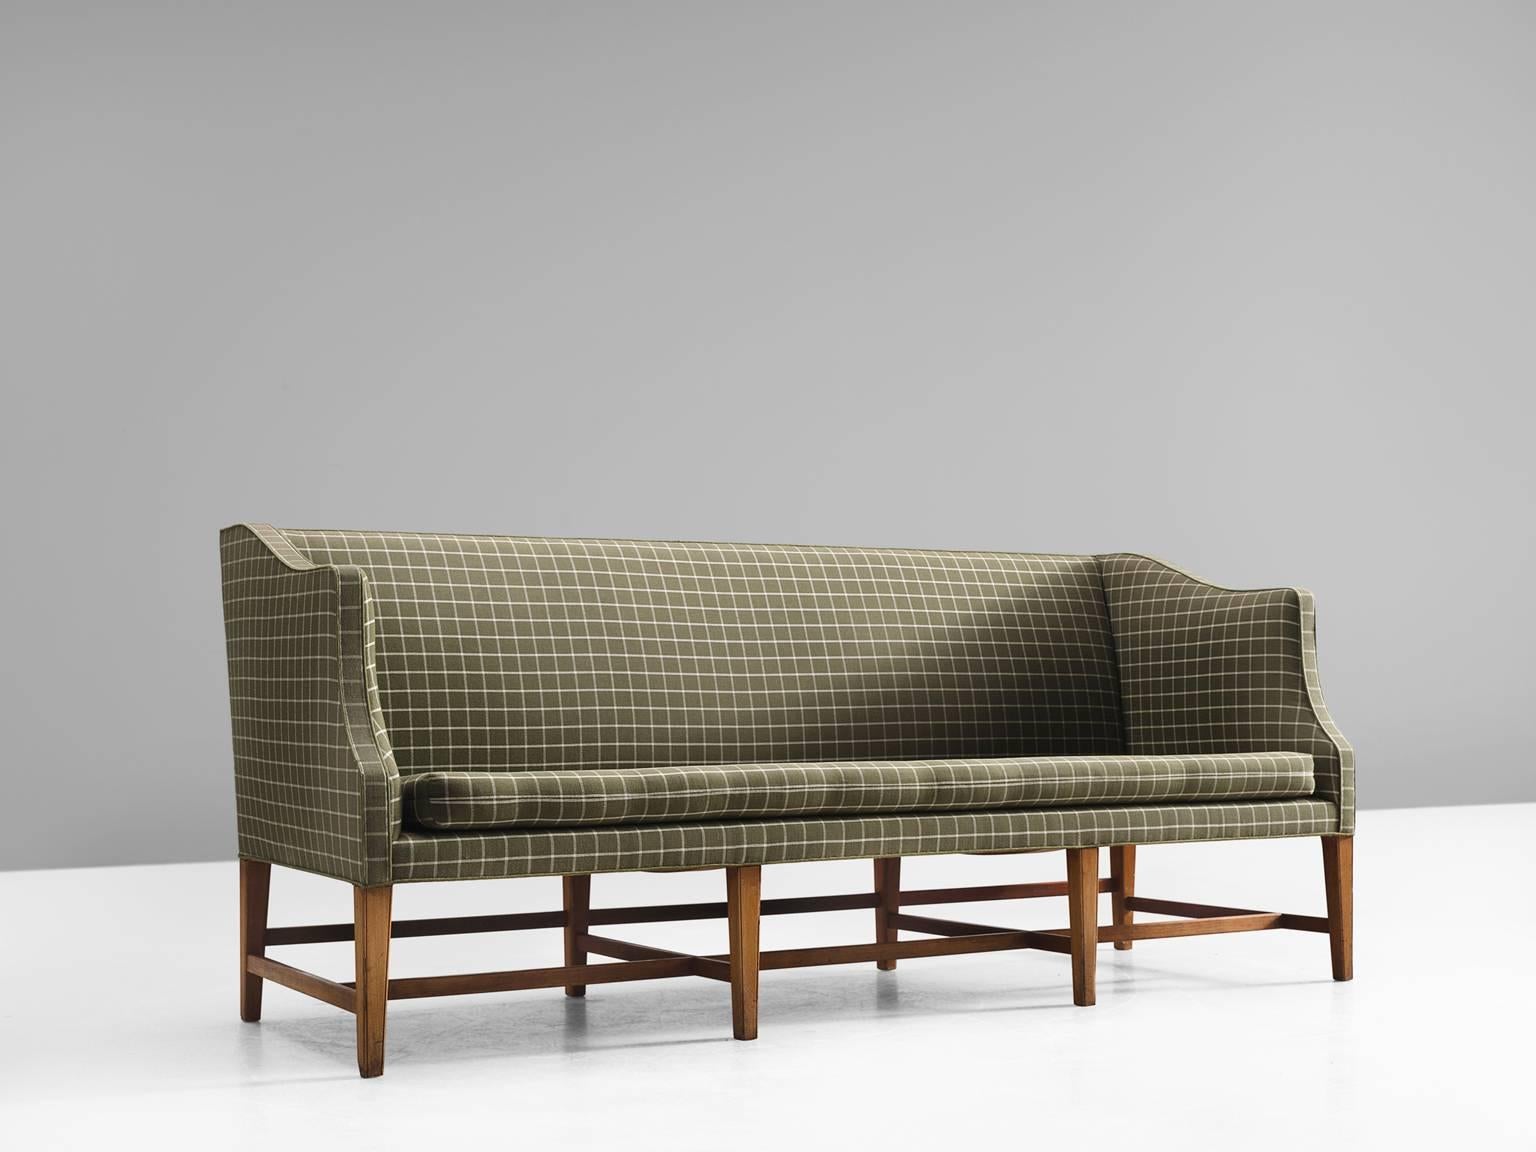 Danish cabinetmaker, fabric, mahogany, Denmark, 1950s. 

This free-standing three-seat sofa with has eight profiled mahogany legs. The sofa is upholstered with a white and green checked fabric. The sofa features ornate forms and shapes and holds a